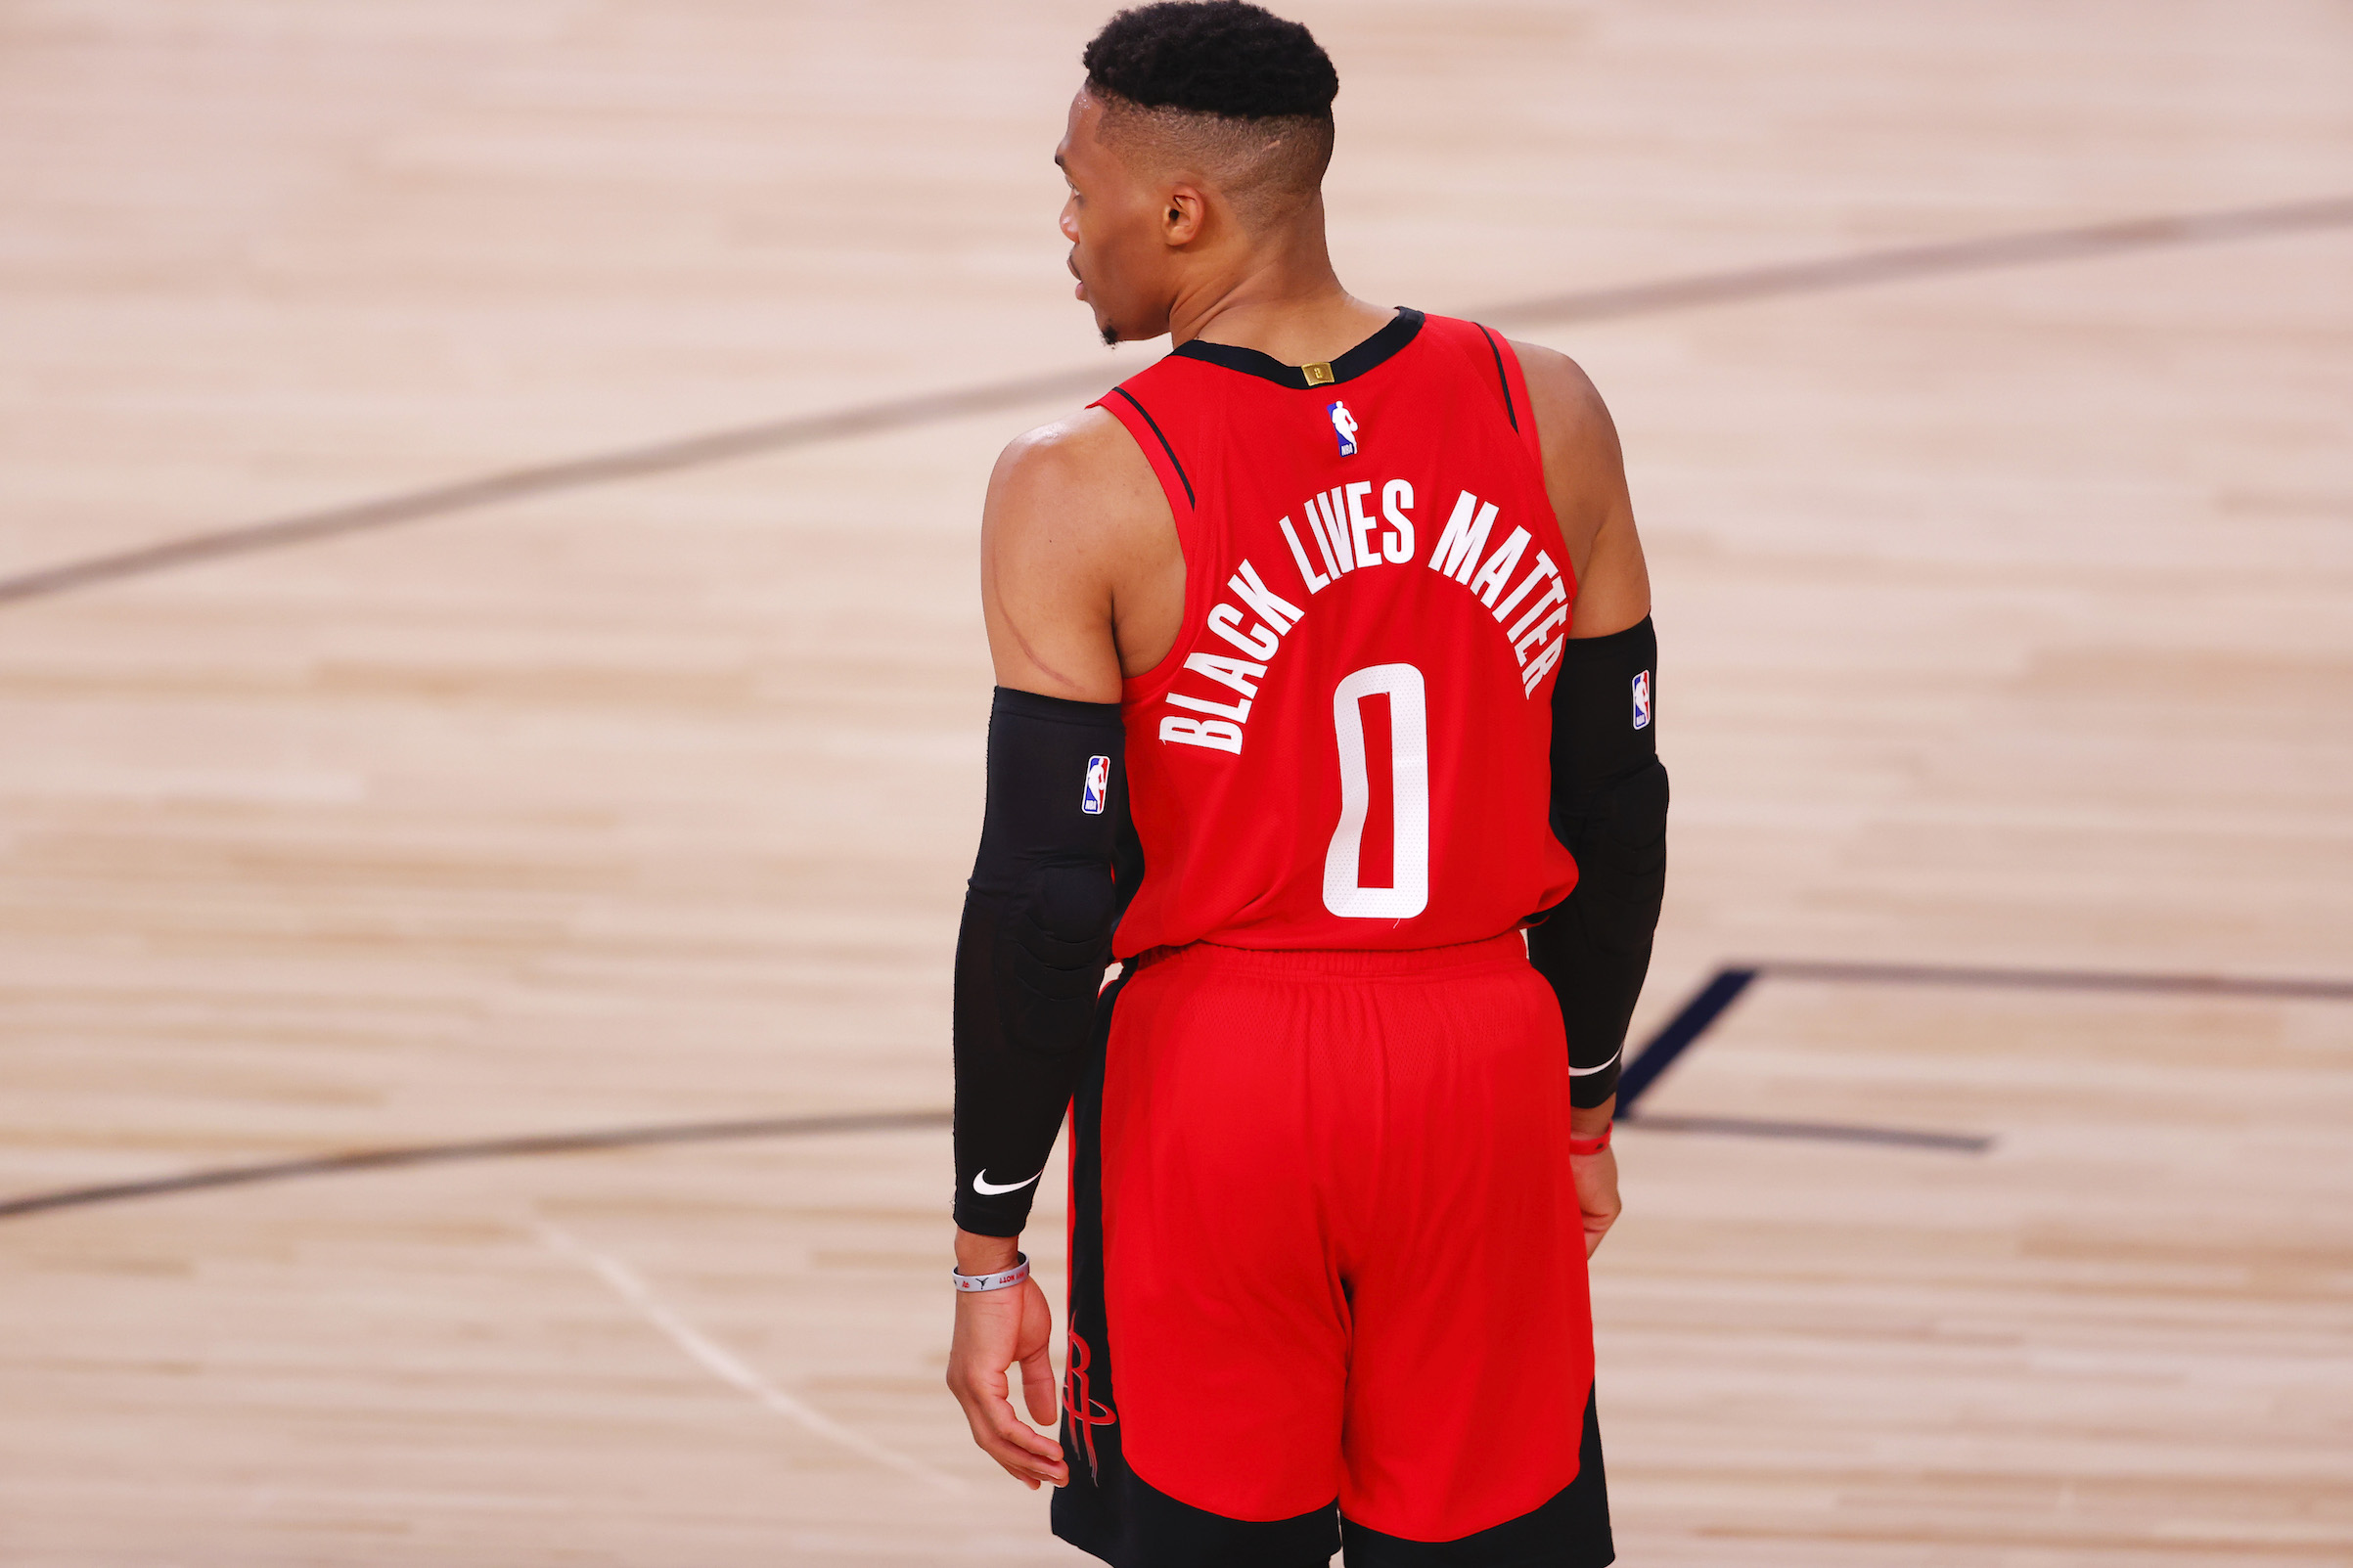 Russell Westbrook #0 of the Houston Rockets wears "Black Lives Matter" on the back of his jersey on Aug. 2, 2020 in Lake Buena Vista, Fla. (Mike Ehrmann—Getty Images)